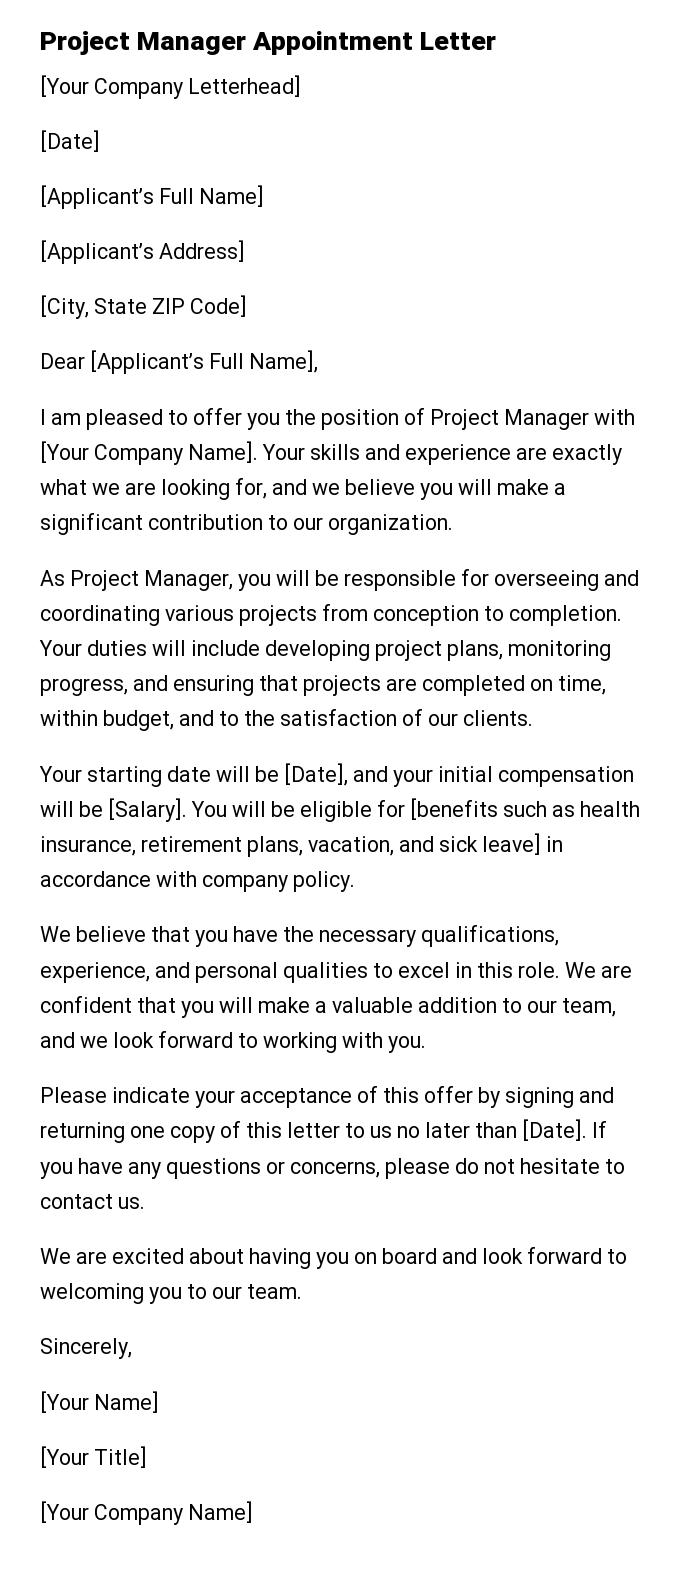 Project Manager Appointment Letter